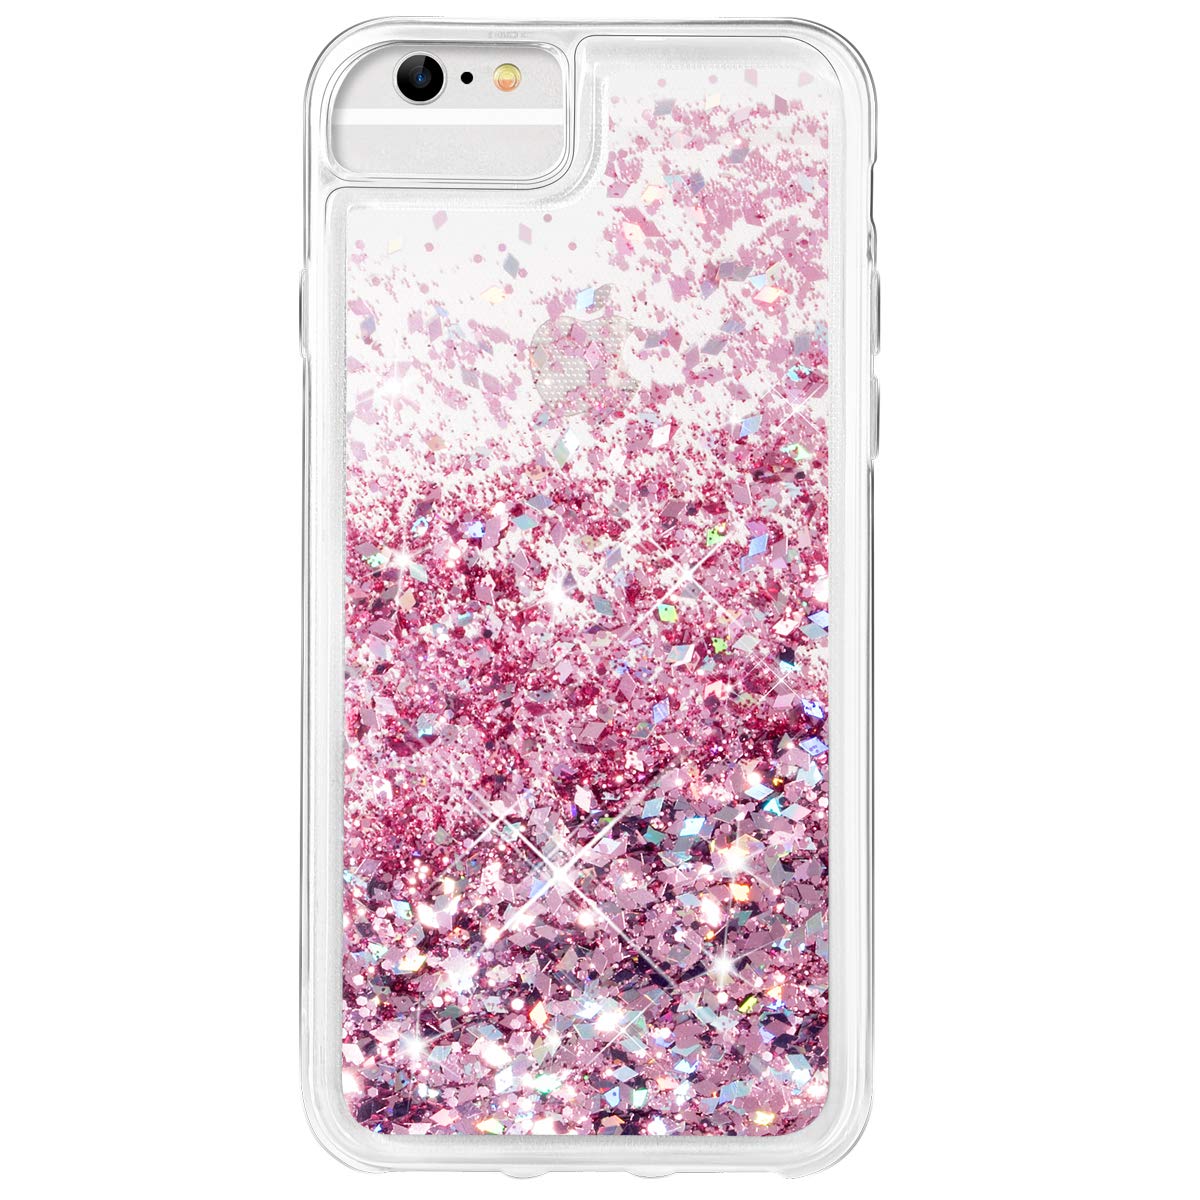 Caka iPhone 6 6S 7 8 Case, iPhone 6 6S Glitter Case with Tempered Glass Screen Protector for Girls Bling Flowing Floating Glitter Sparkle Soft TPU Liquid Case for iPhone 6 6S 7 8 4.7 inch (Rose Gold)